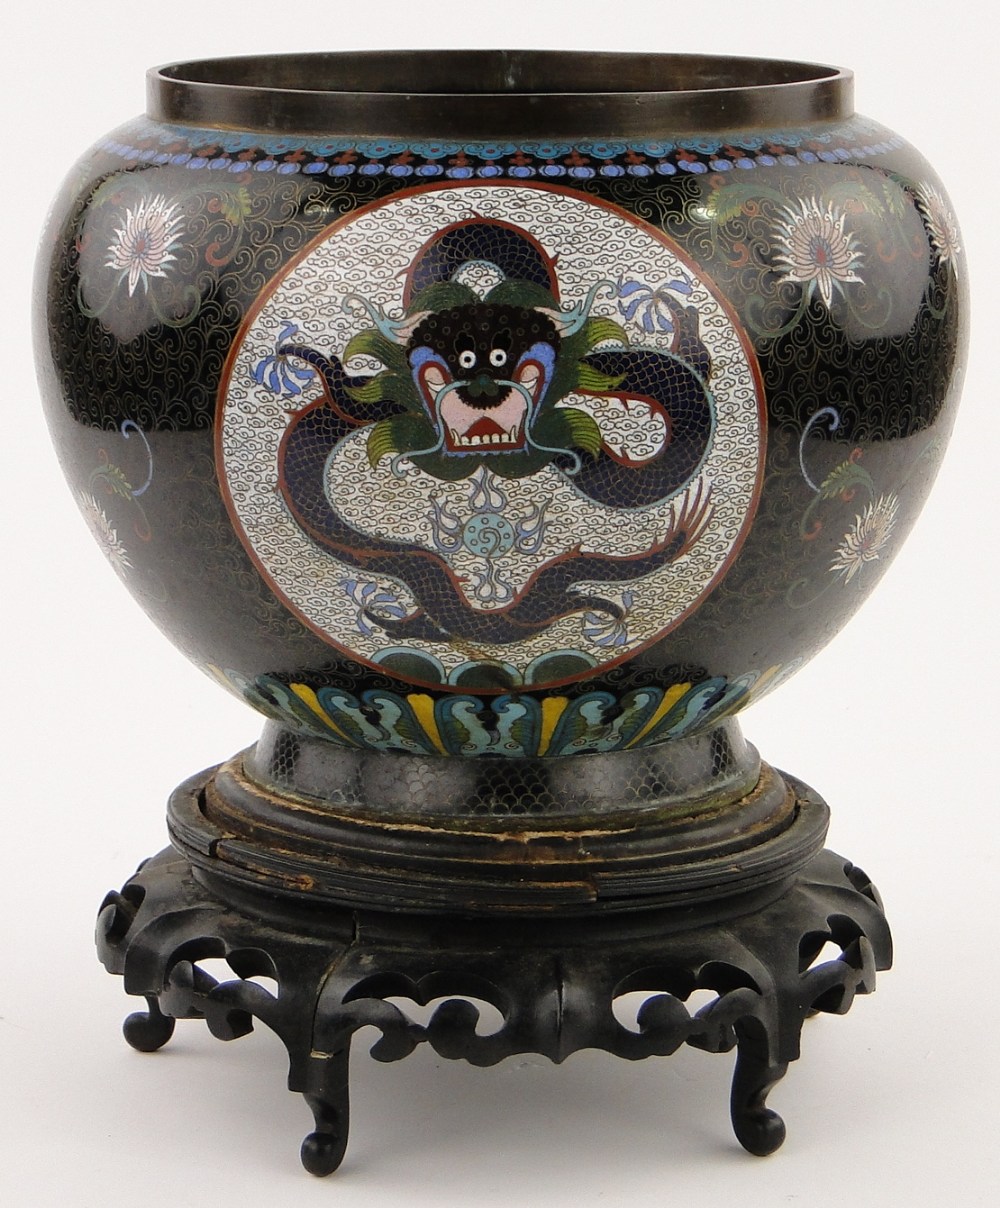 A black ground Cloisonne bowl
with dragon decorated panels, height 9.5", on carved wood stand.